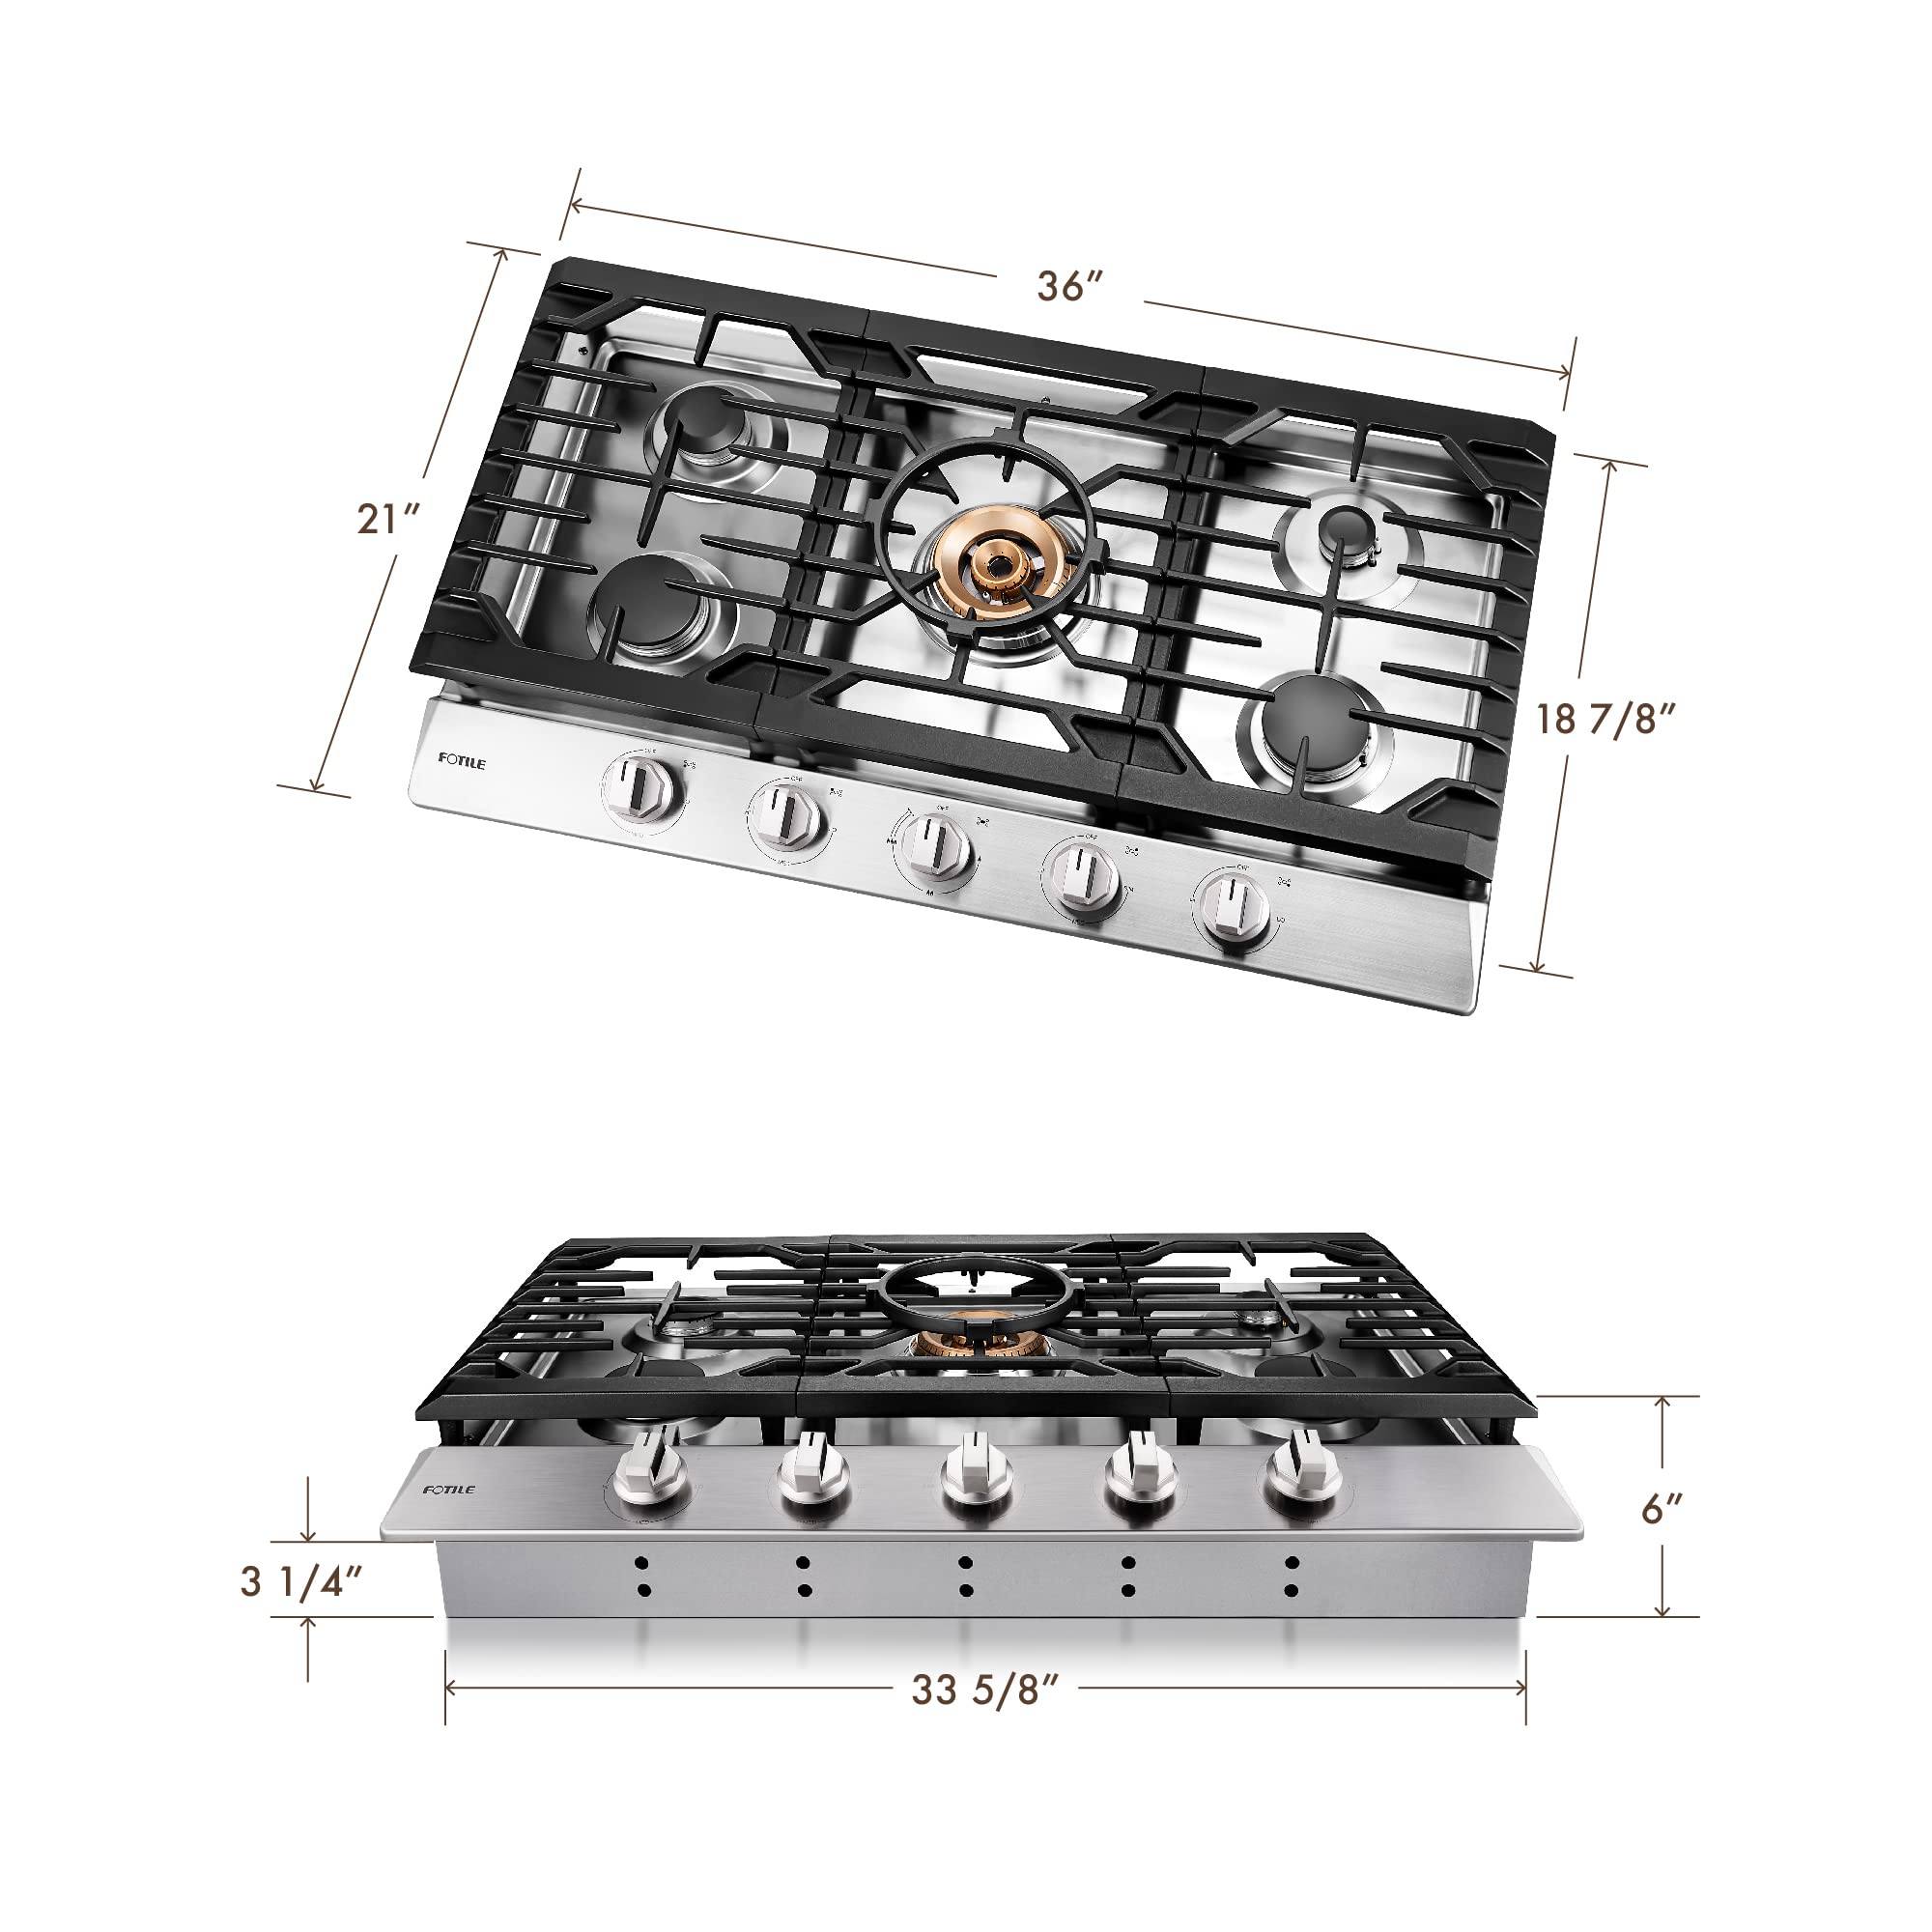 FOTILE GLS36502 36” Stainless Steel 5-Burner Gas Cooktop, Tri-Ring 22,000 BTUs Center Burner with Flame Failure Protection Removable Grates and Installation/LP Kit